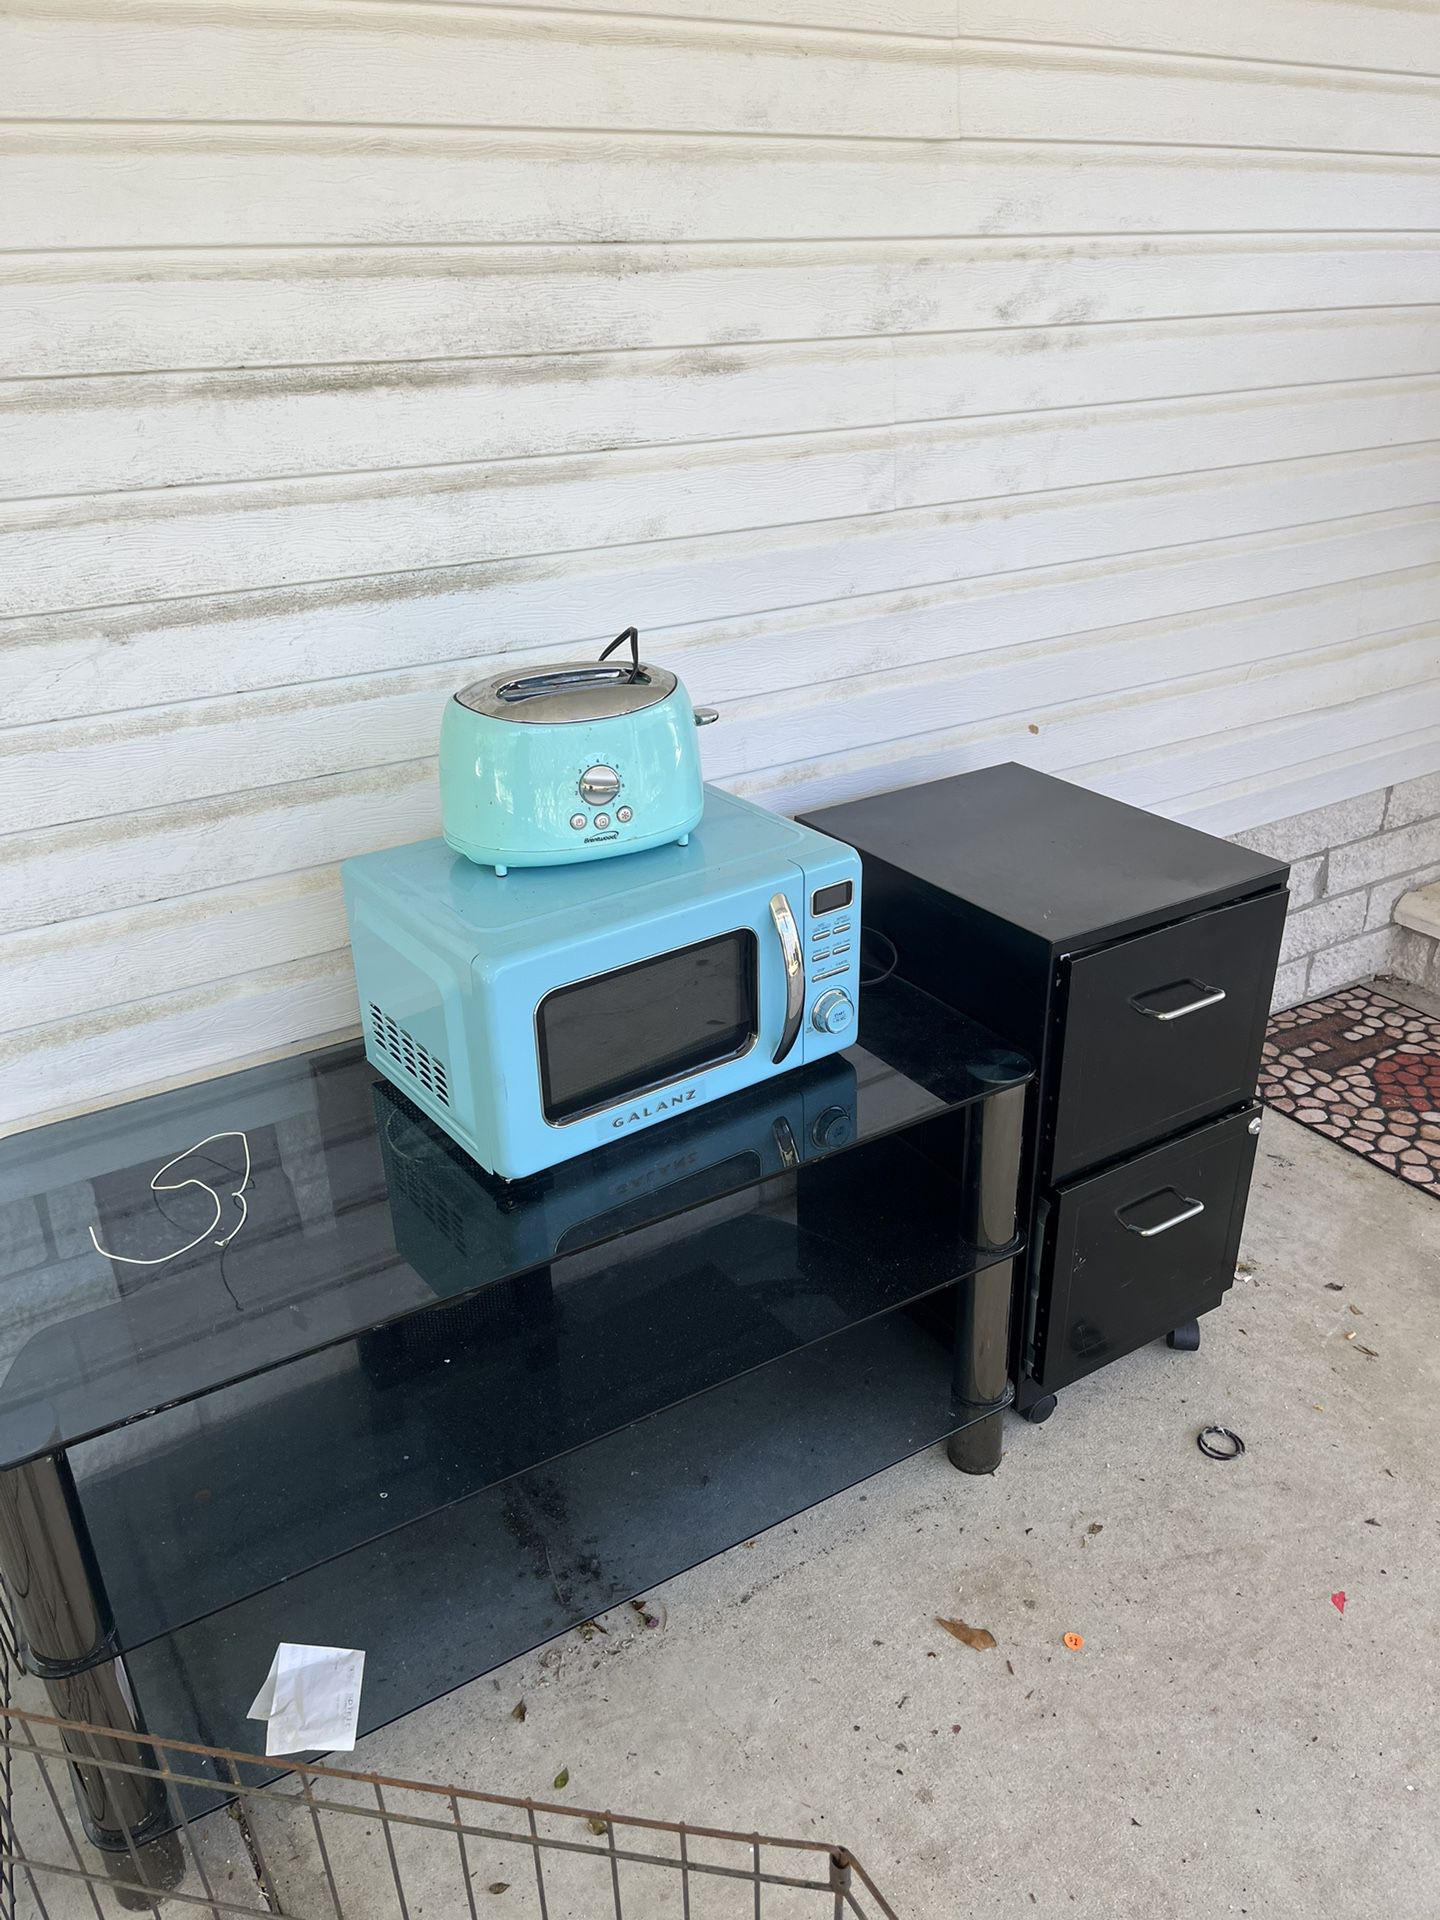 Teal Colored Microwave And Toaster